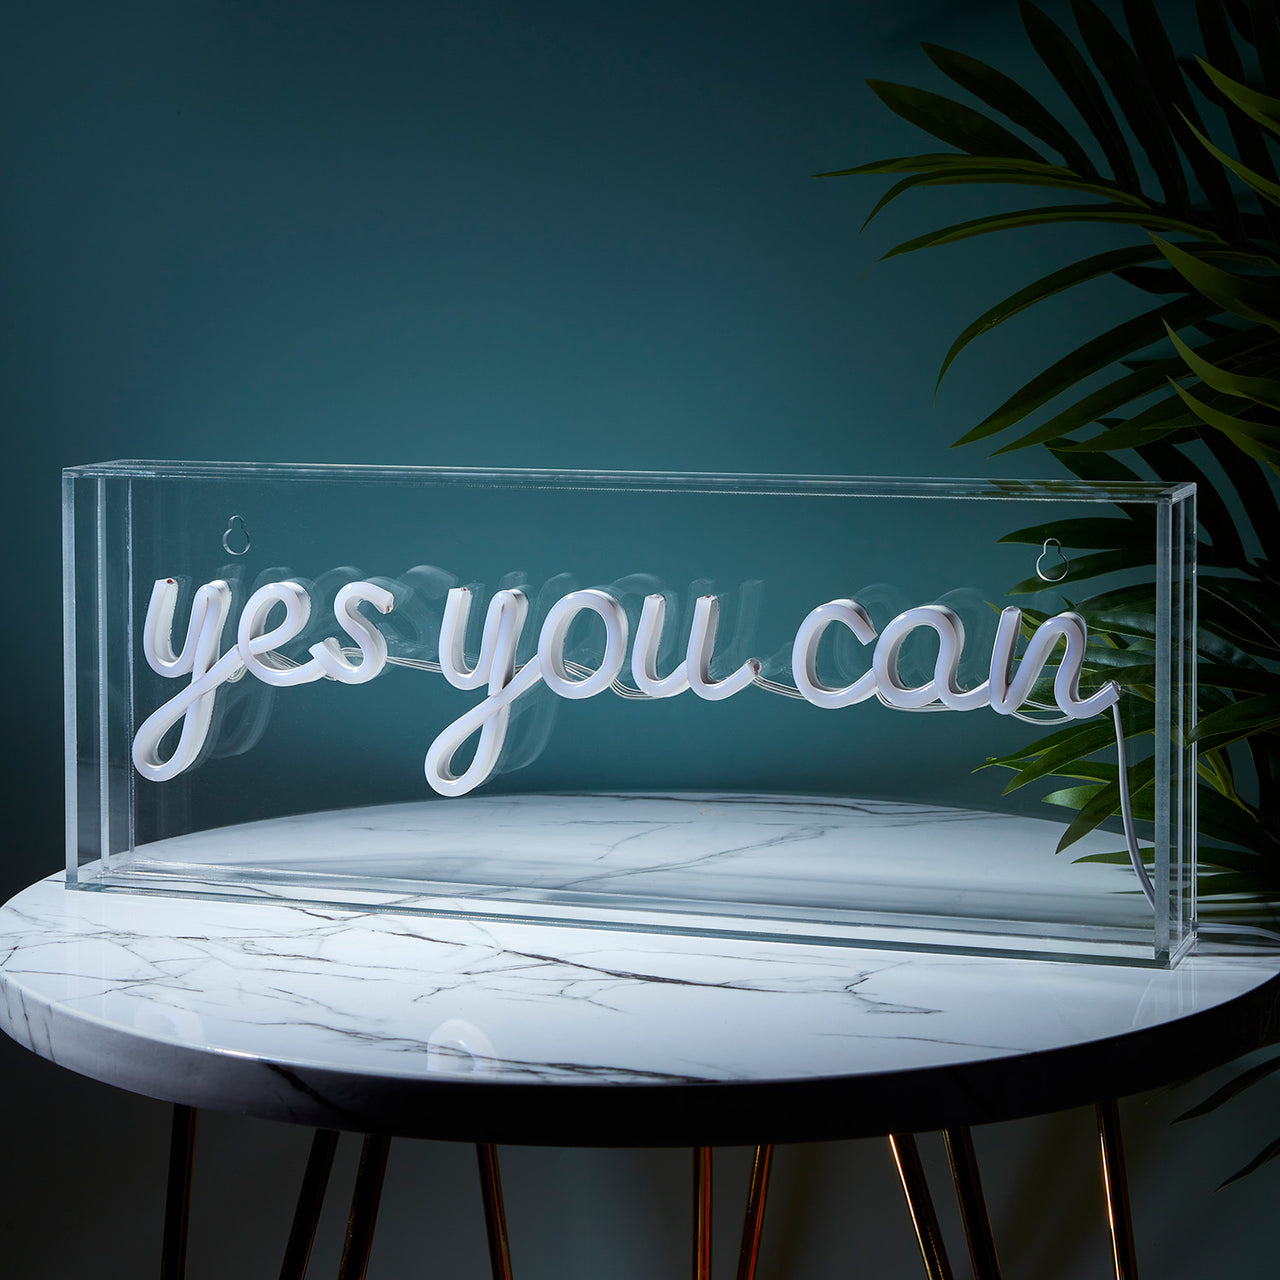 Yes You Can Neon Wall Light